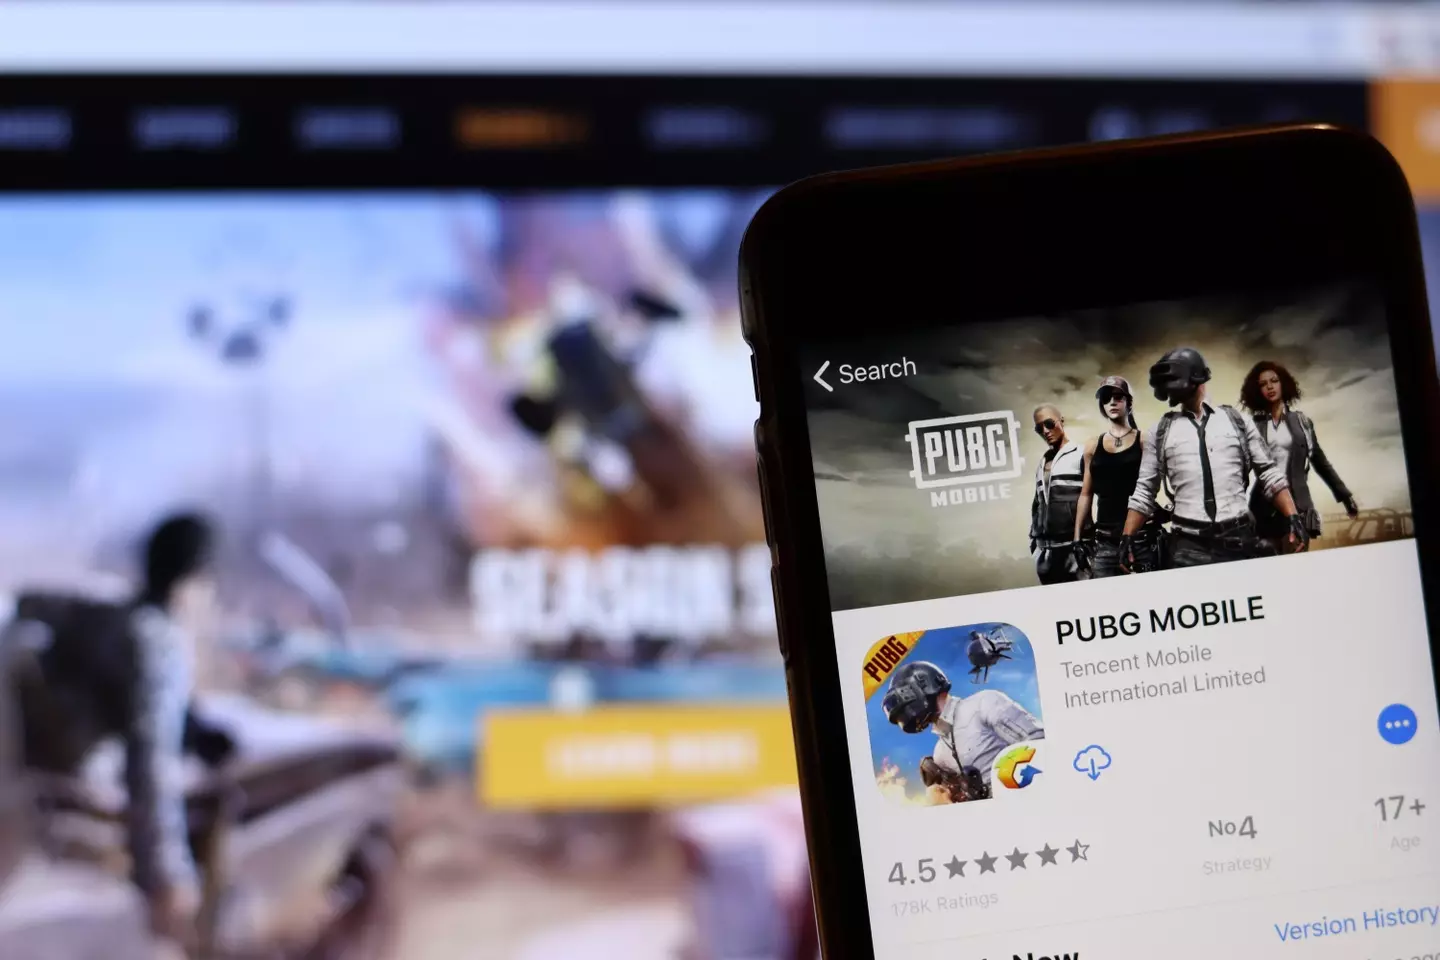 PUBG mobile is also getting hit with a ban by the Taliban.